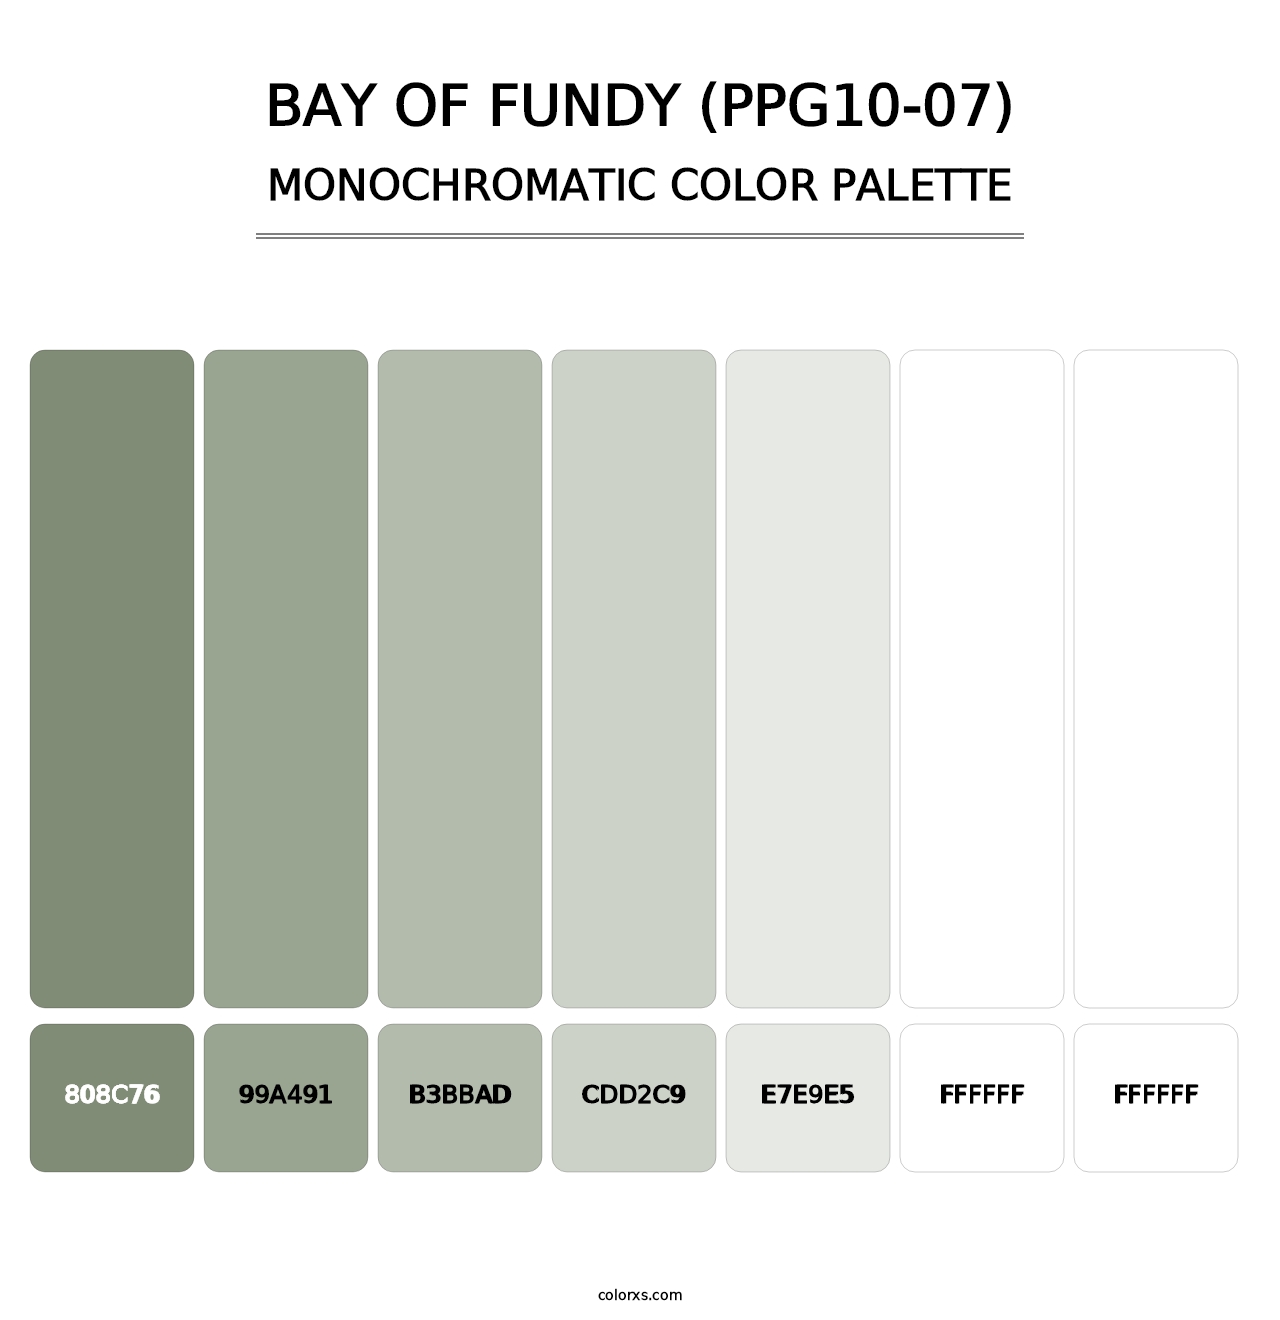 Bay Of Fundy (PPG10-07) - Monochromatic Color Palette